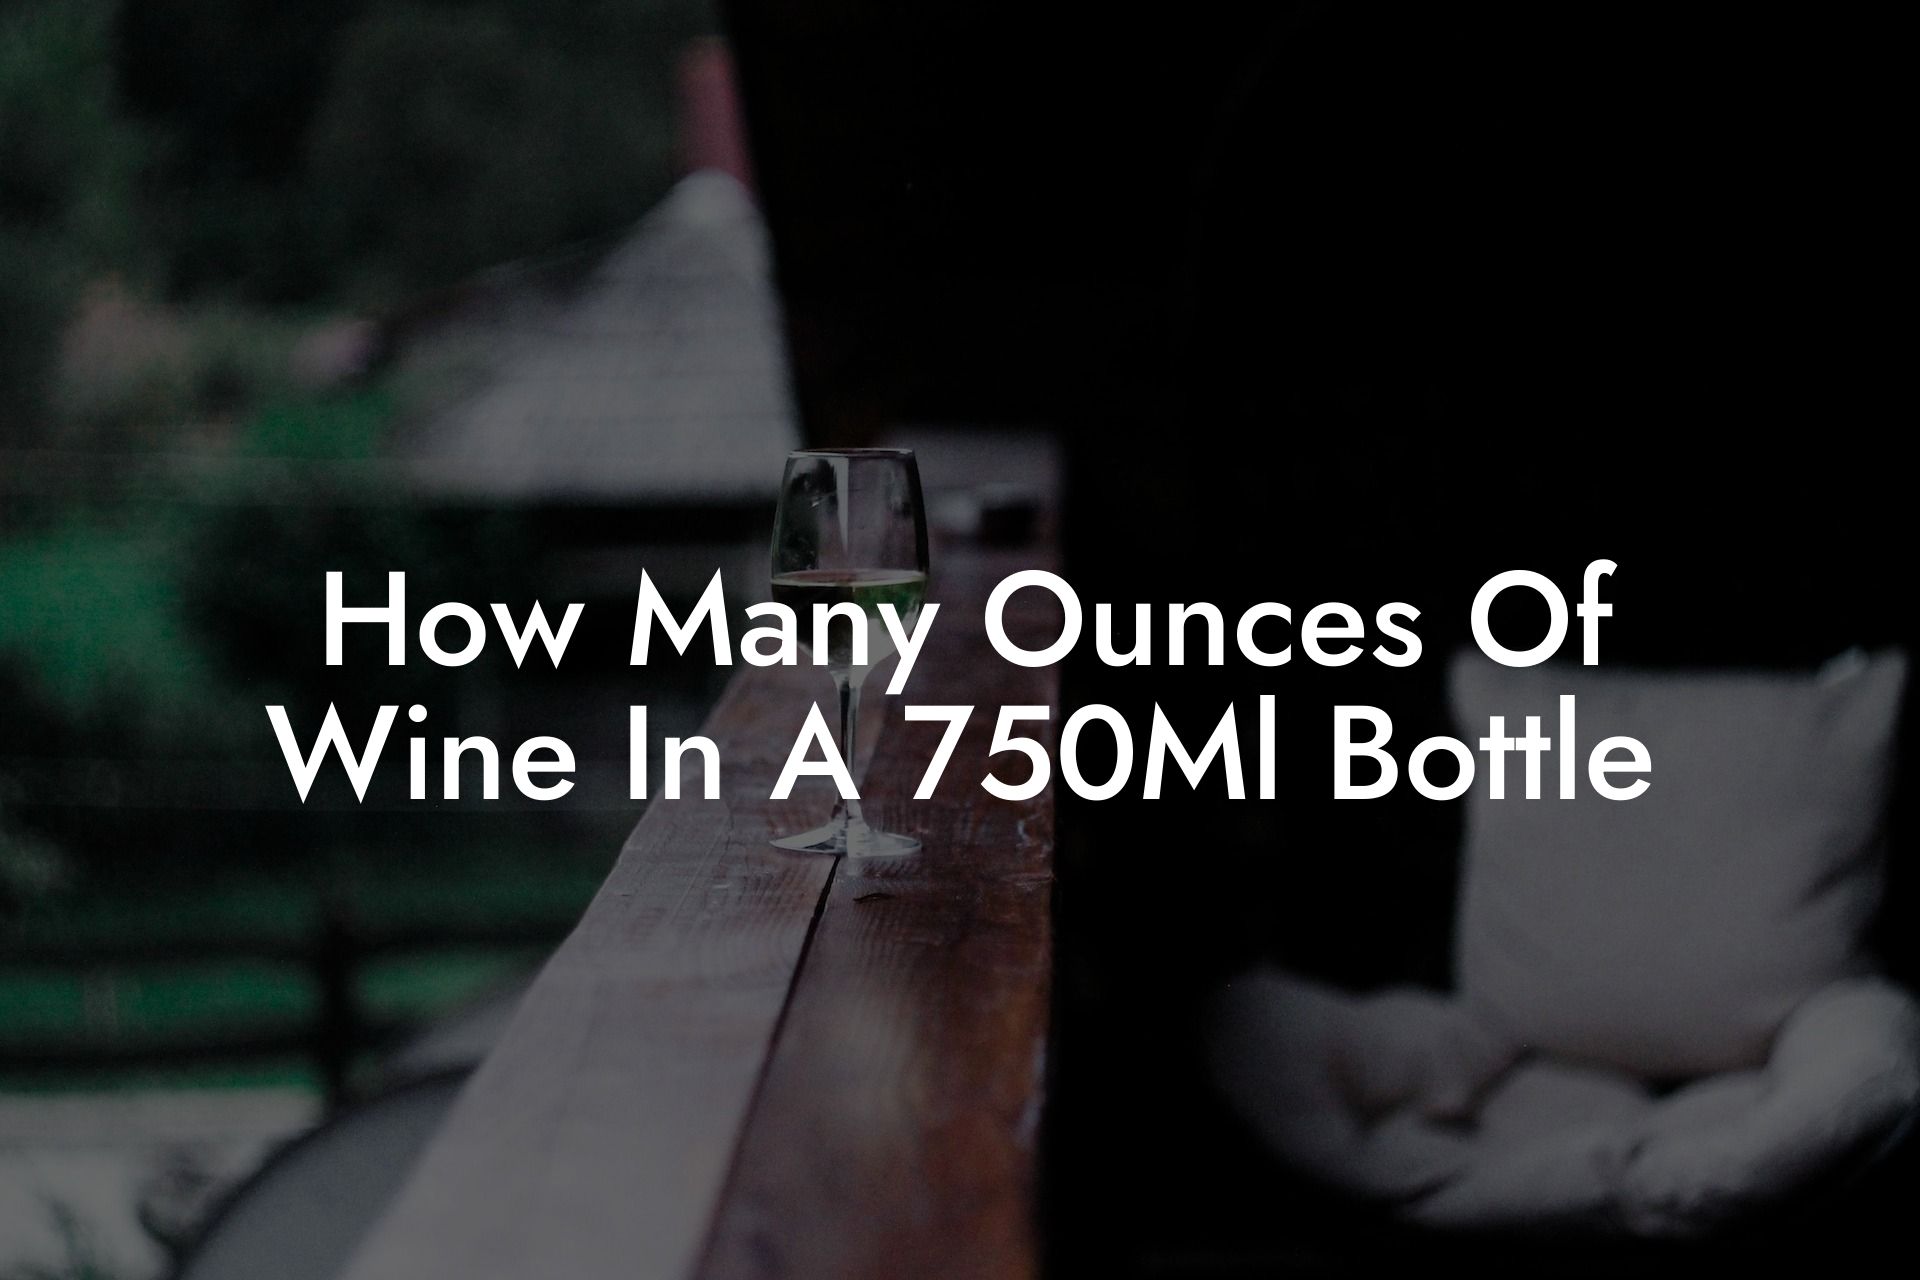 How Many Ounces Of Wine In A 750Ml Bottle